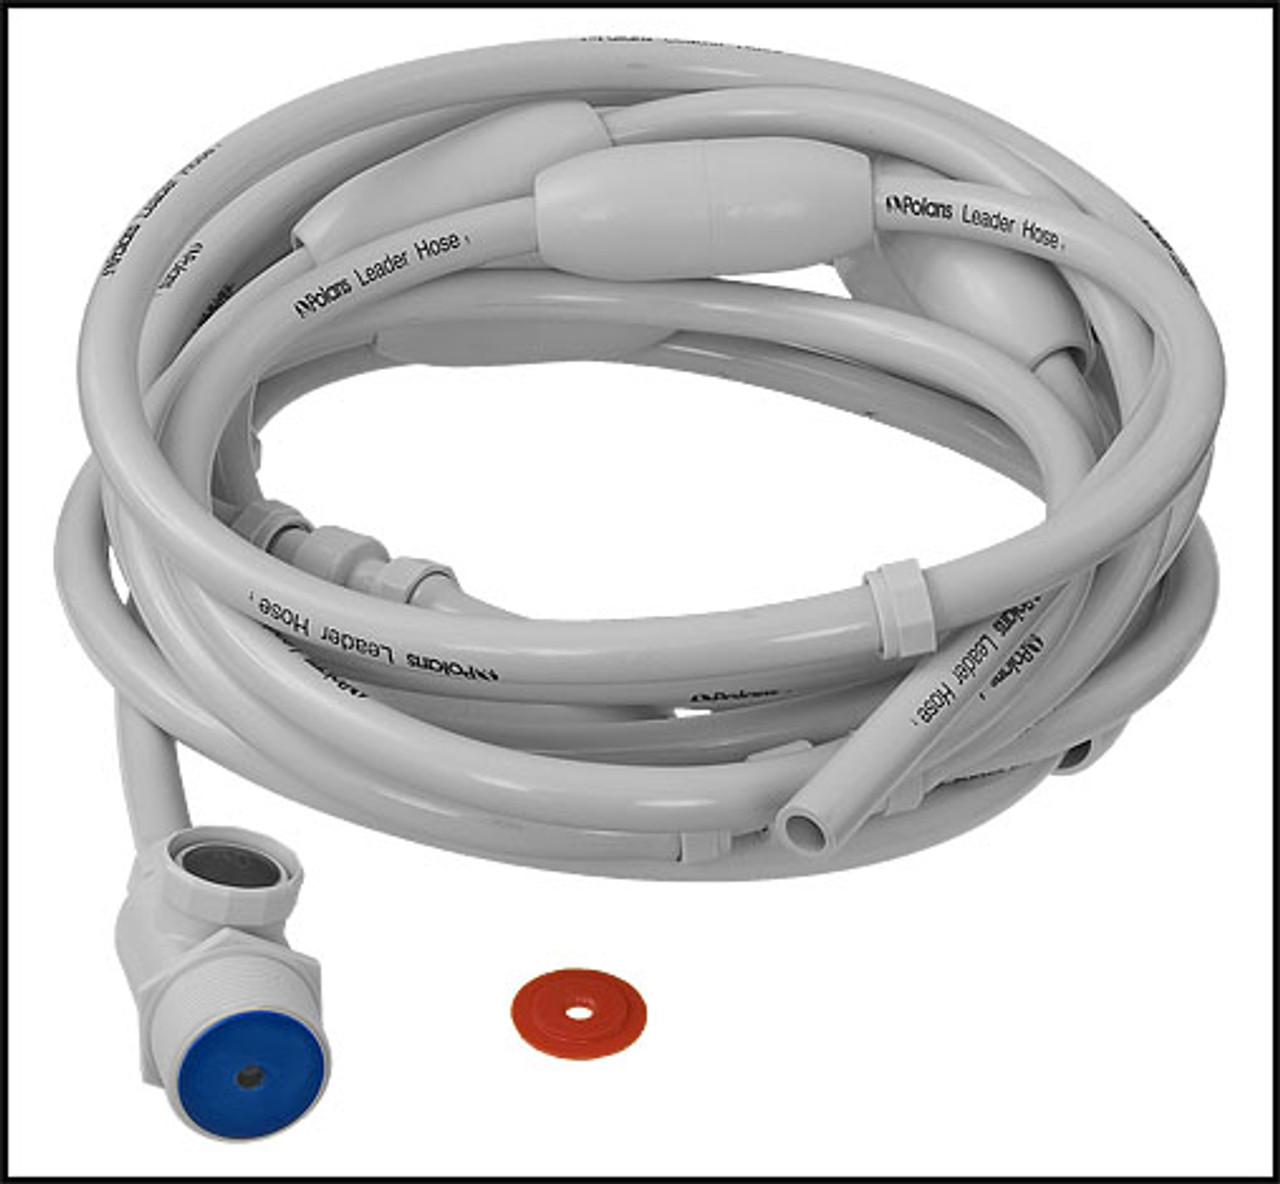 Polaris Feed Hose Complete With Universal Wall Fittings & Floats But No Back-Up Valve For 180/280/380 Pool Cleaners (#G5)